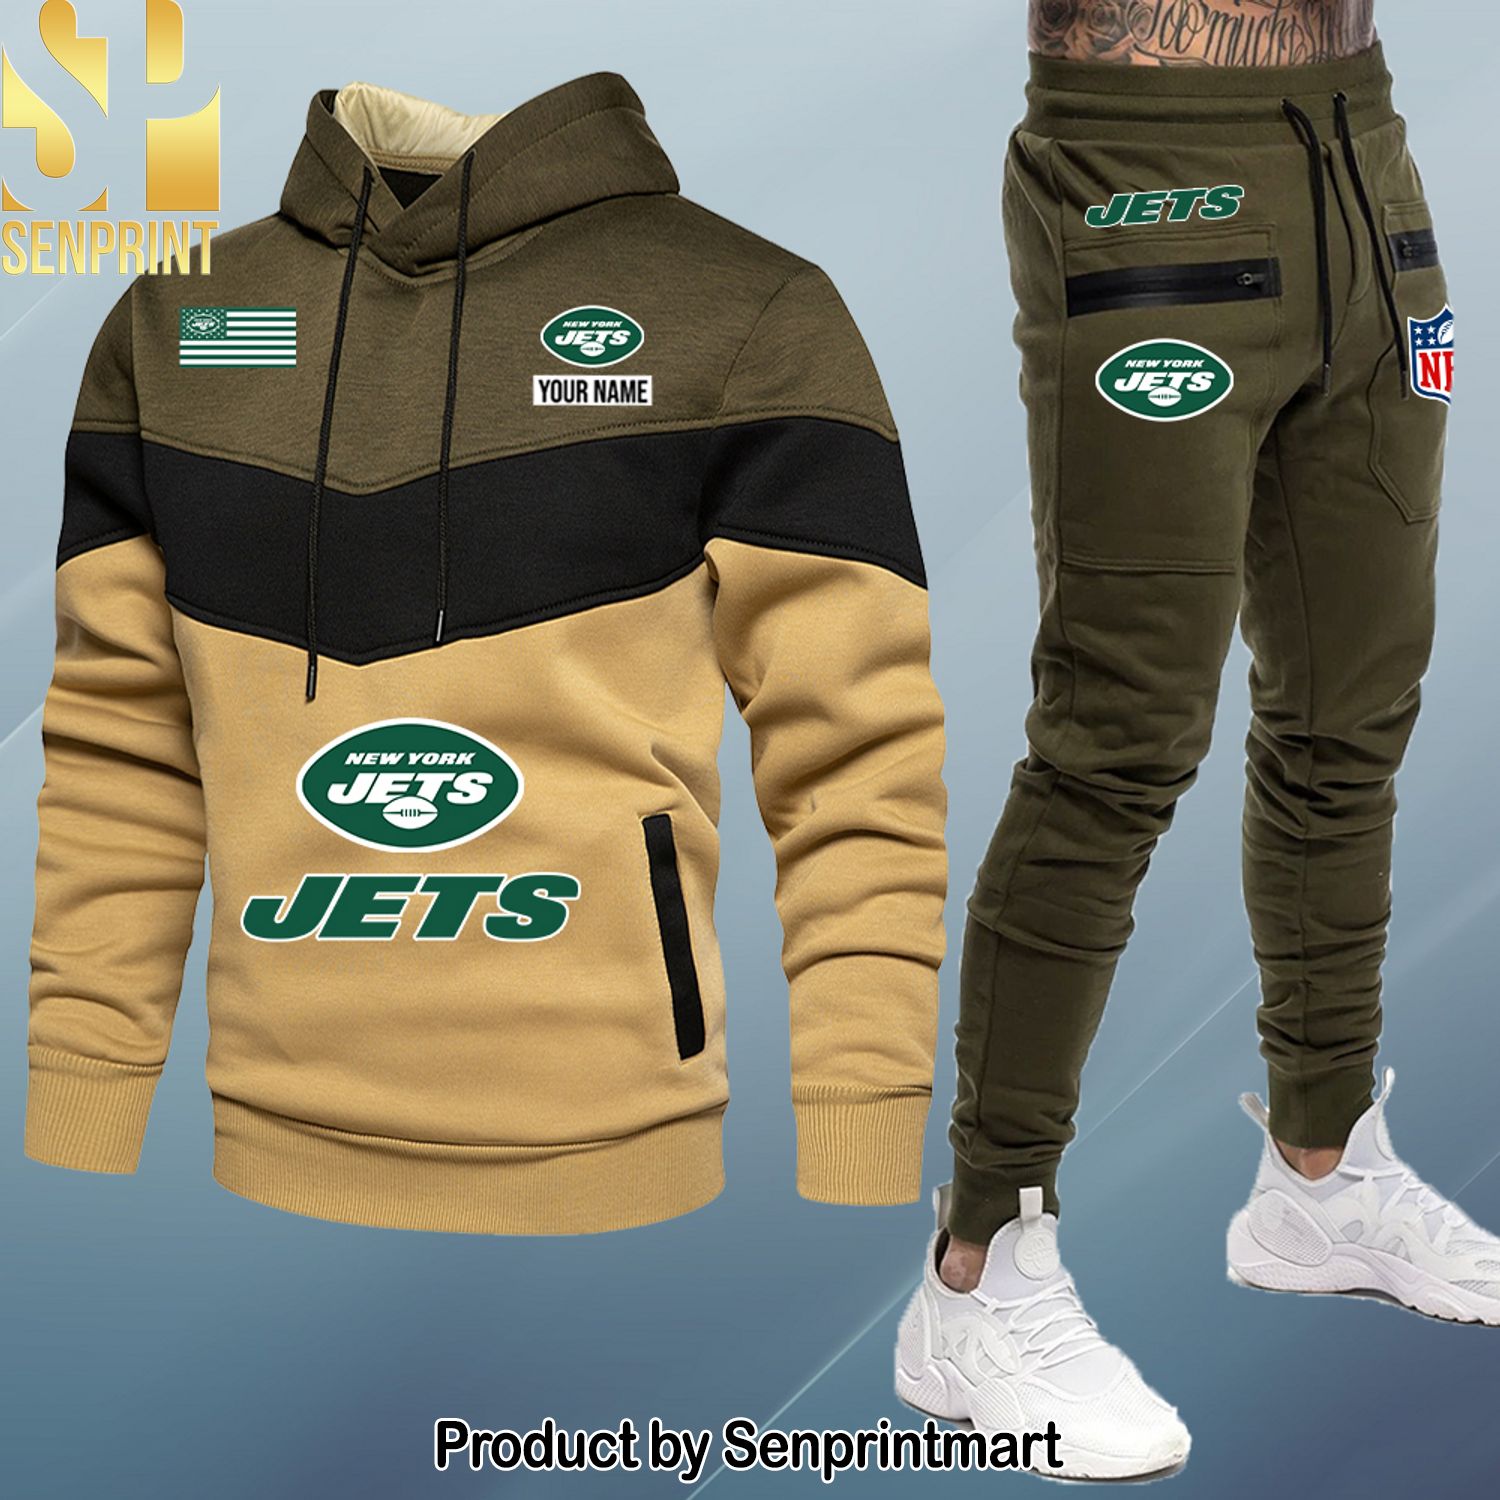 New York Jets Unisex Full Printed Shirt and Pants